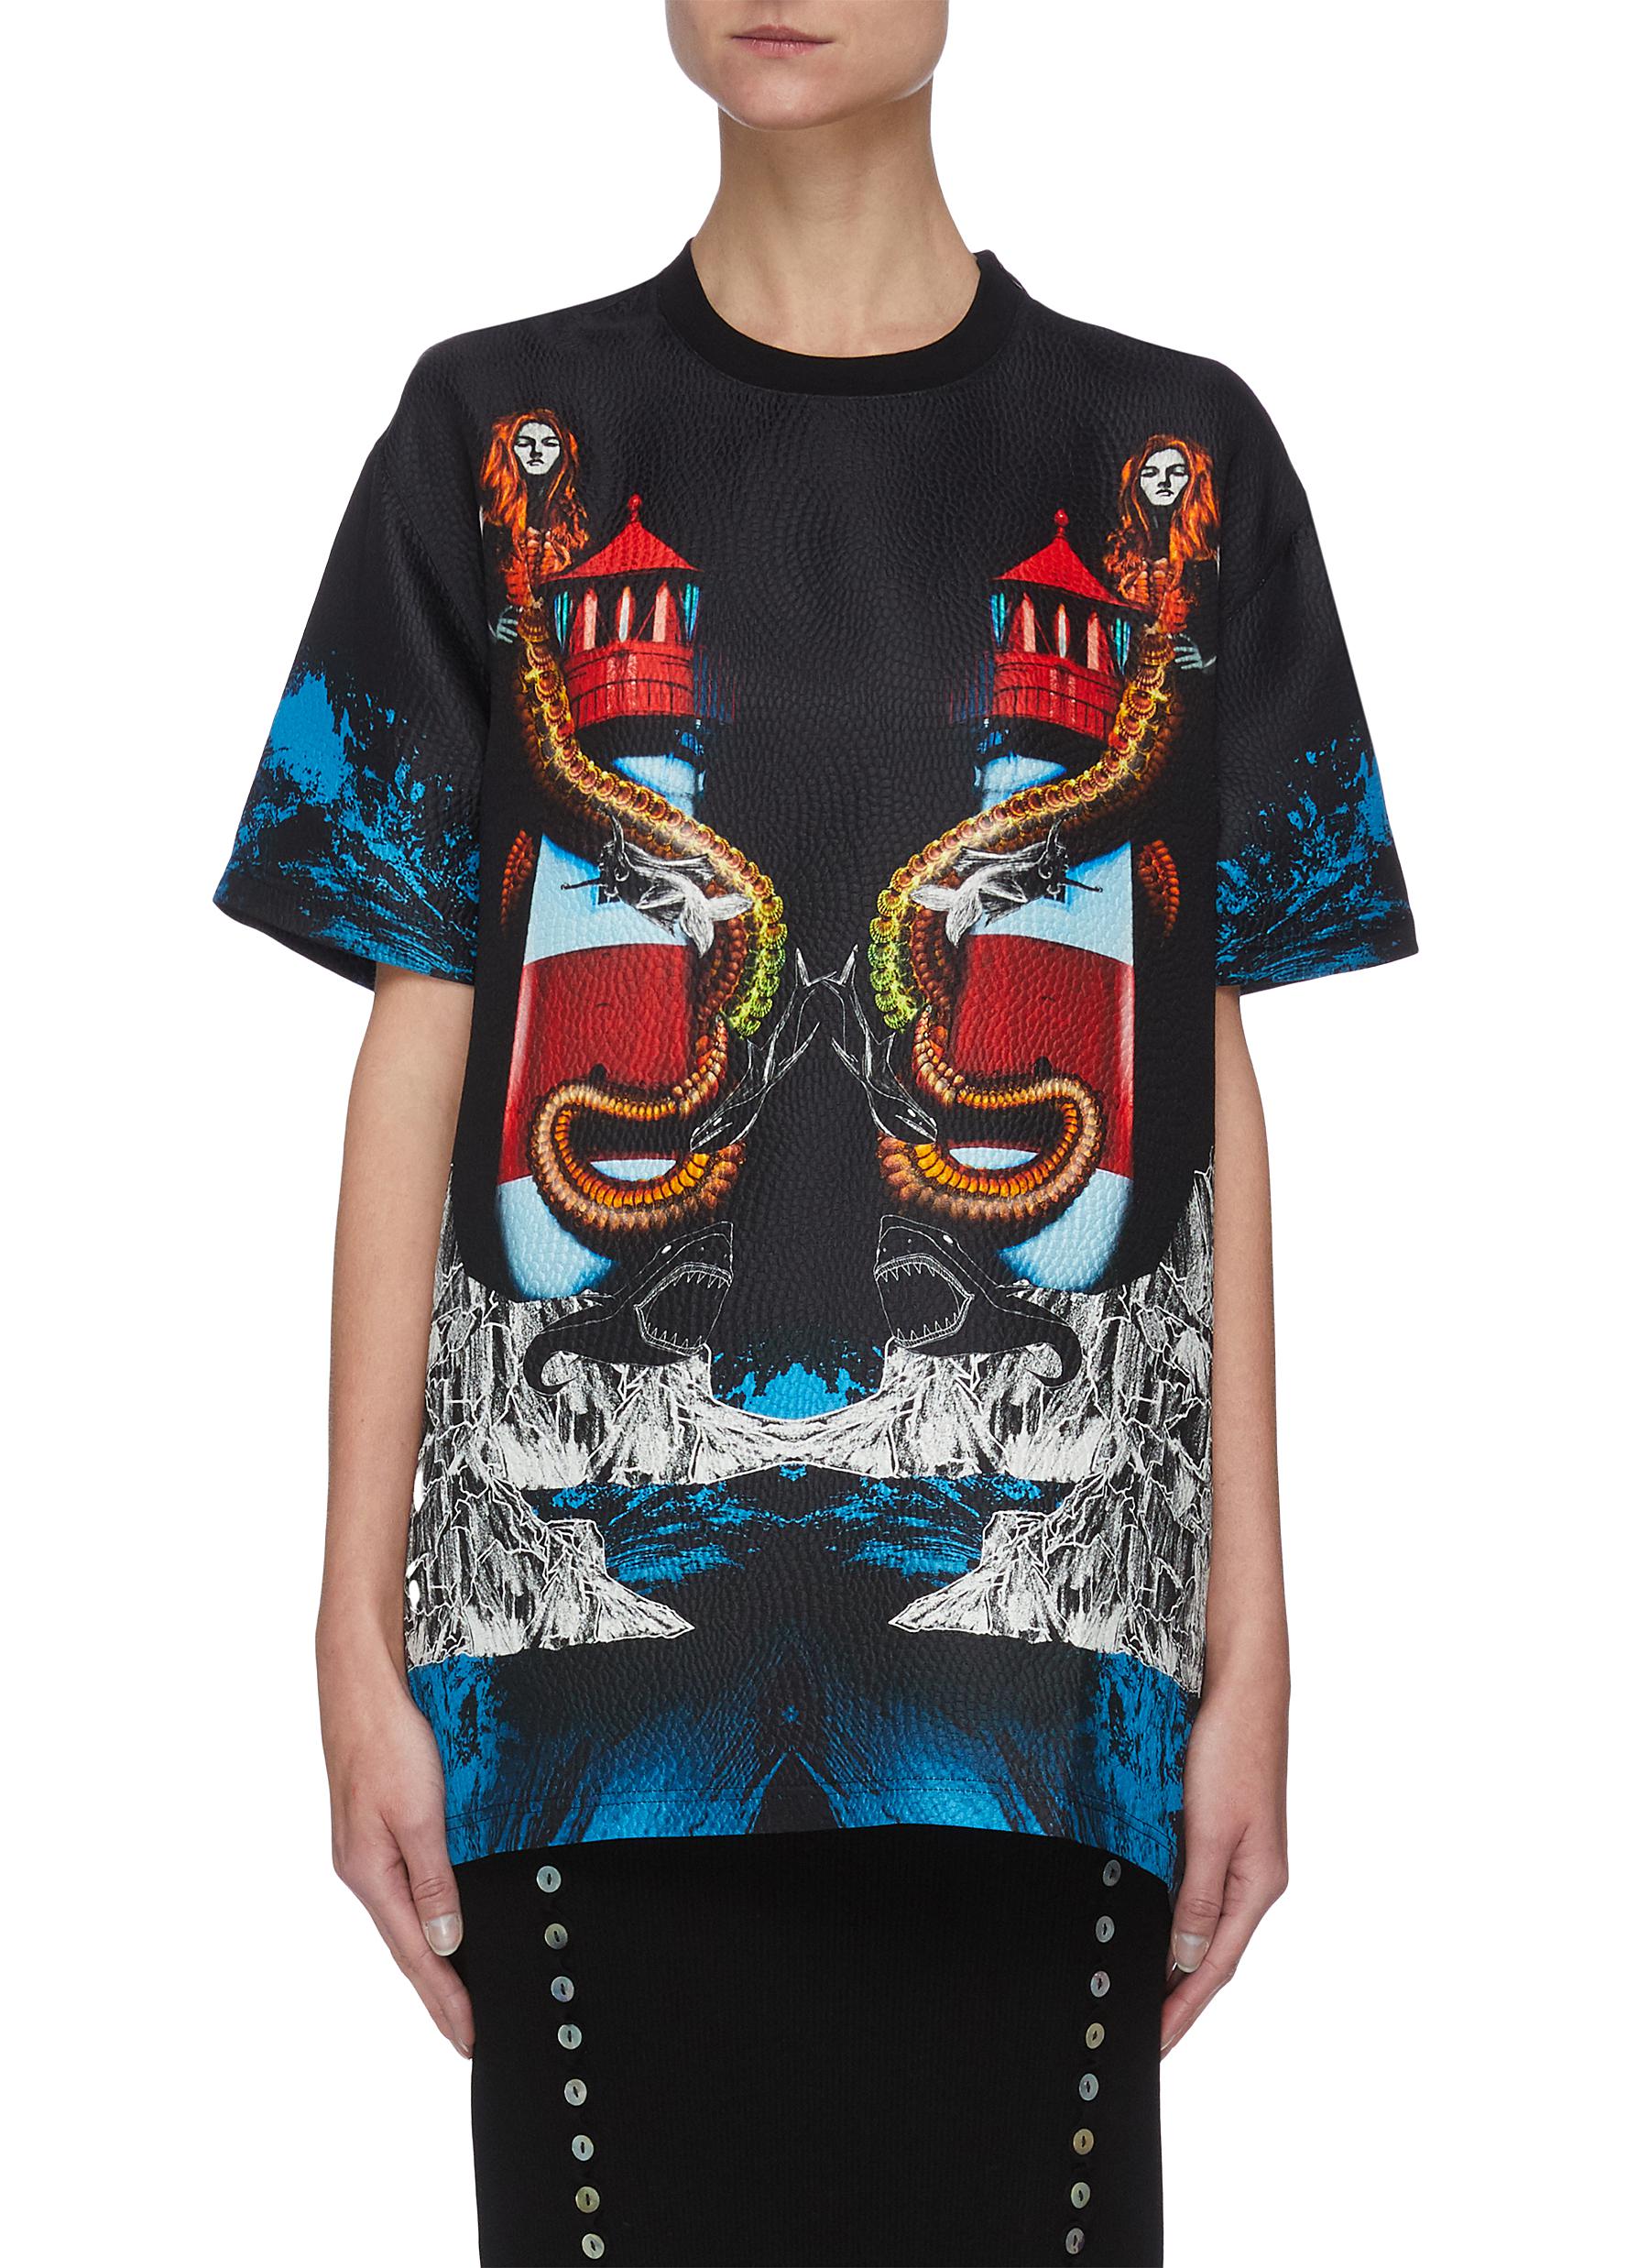 tro Fortælle brydning BURBERRY | Look 39' mermaid lighthouse graphic print T-shirt | Women | Lane  Crawford